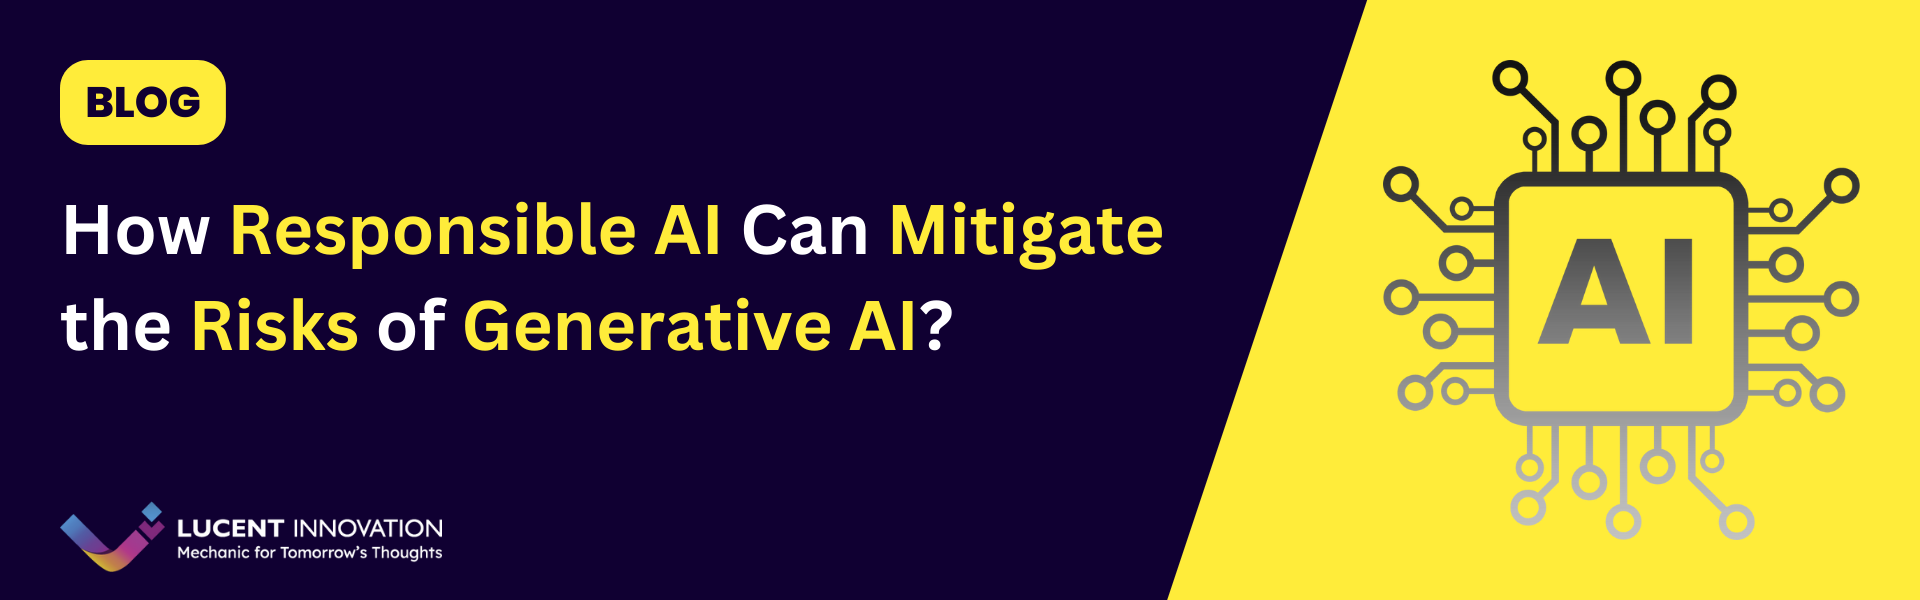 How Responsible AI Can Mitigate the Risks of Generative AI?